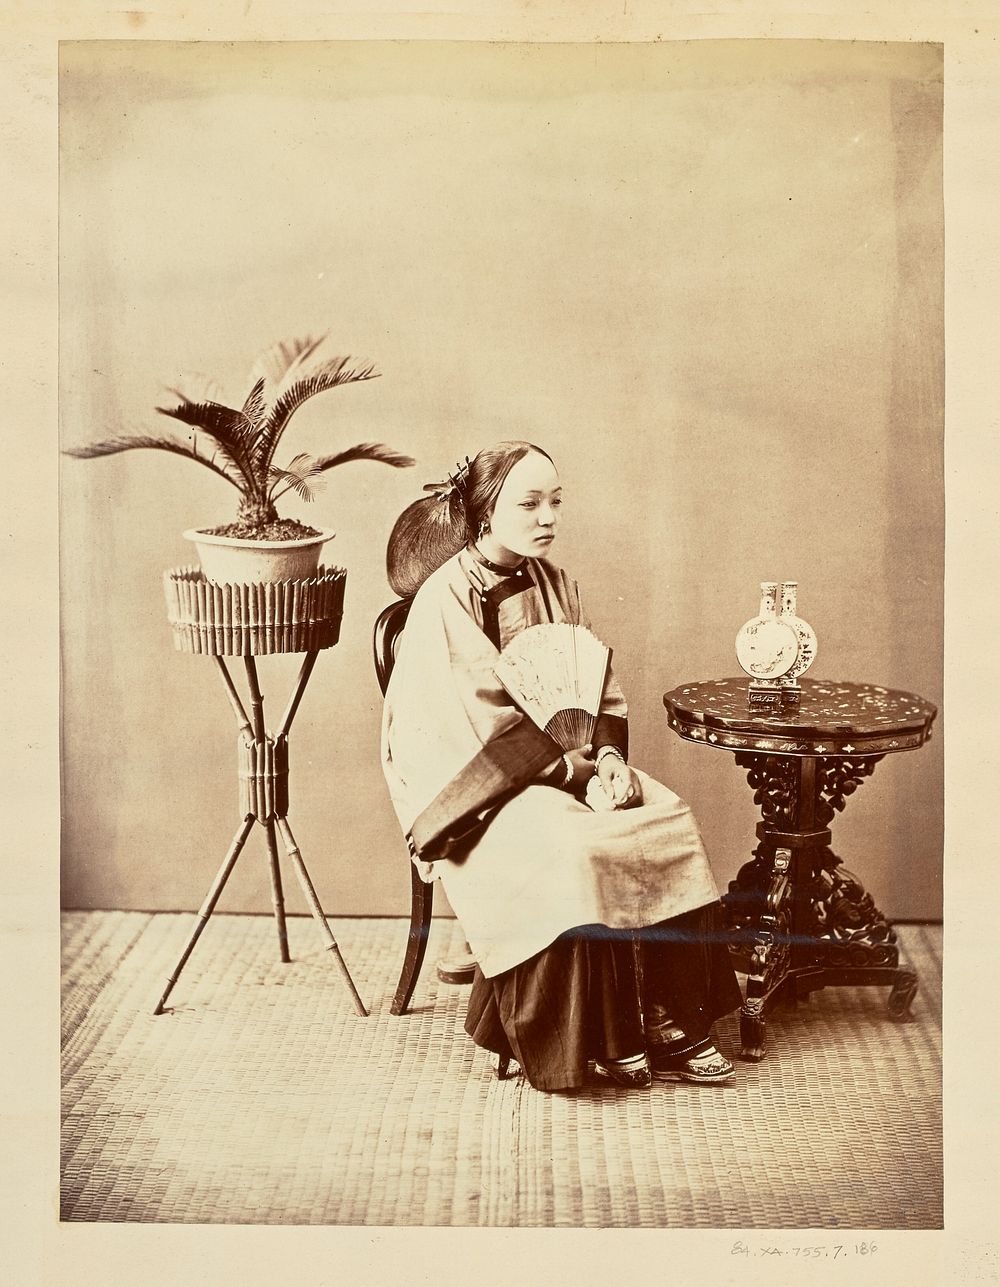 Studio portrait of a seated young woman holding a fan by William Saunders